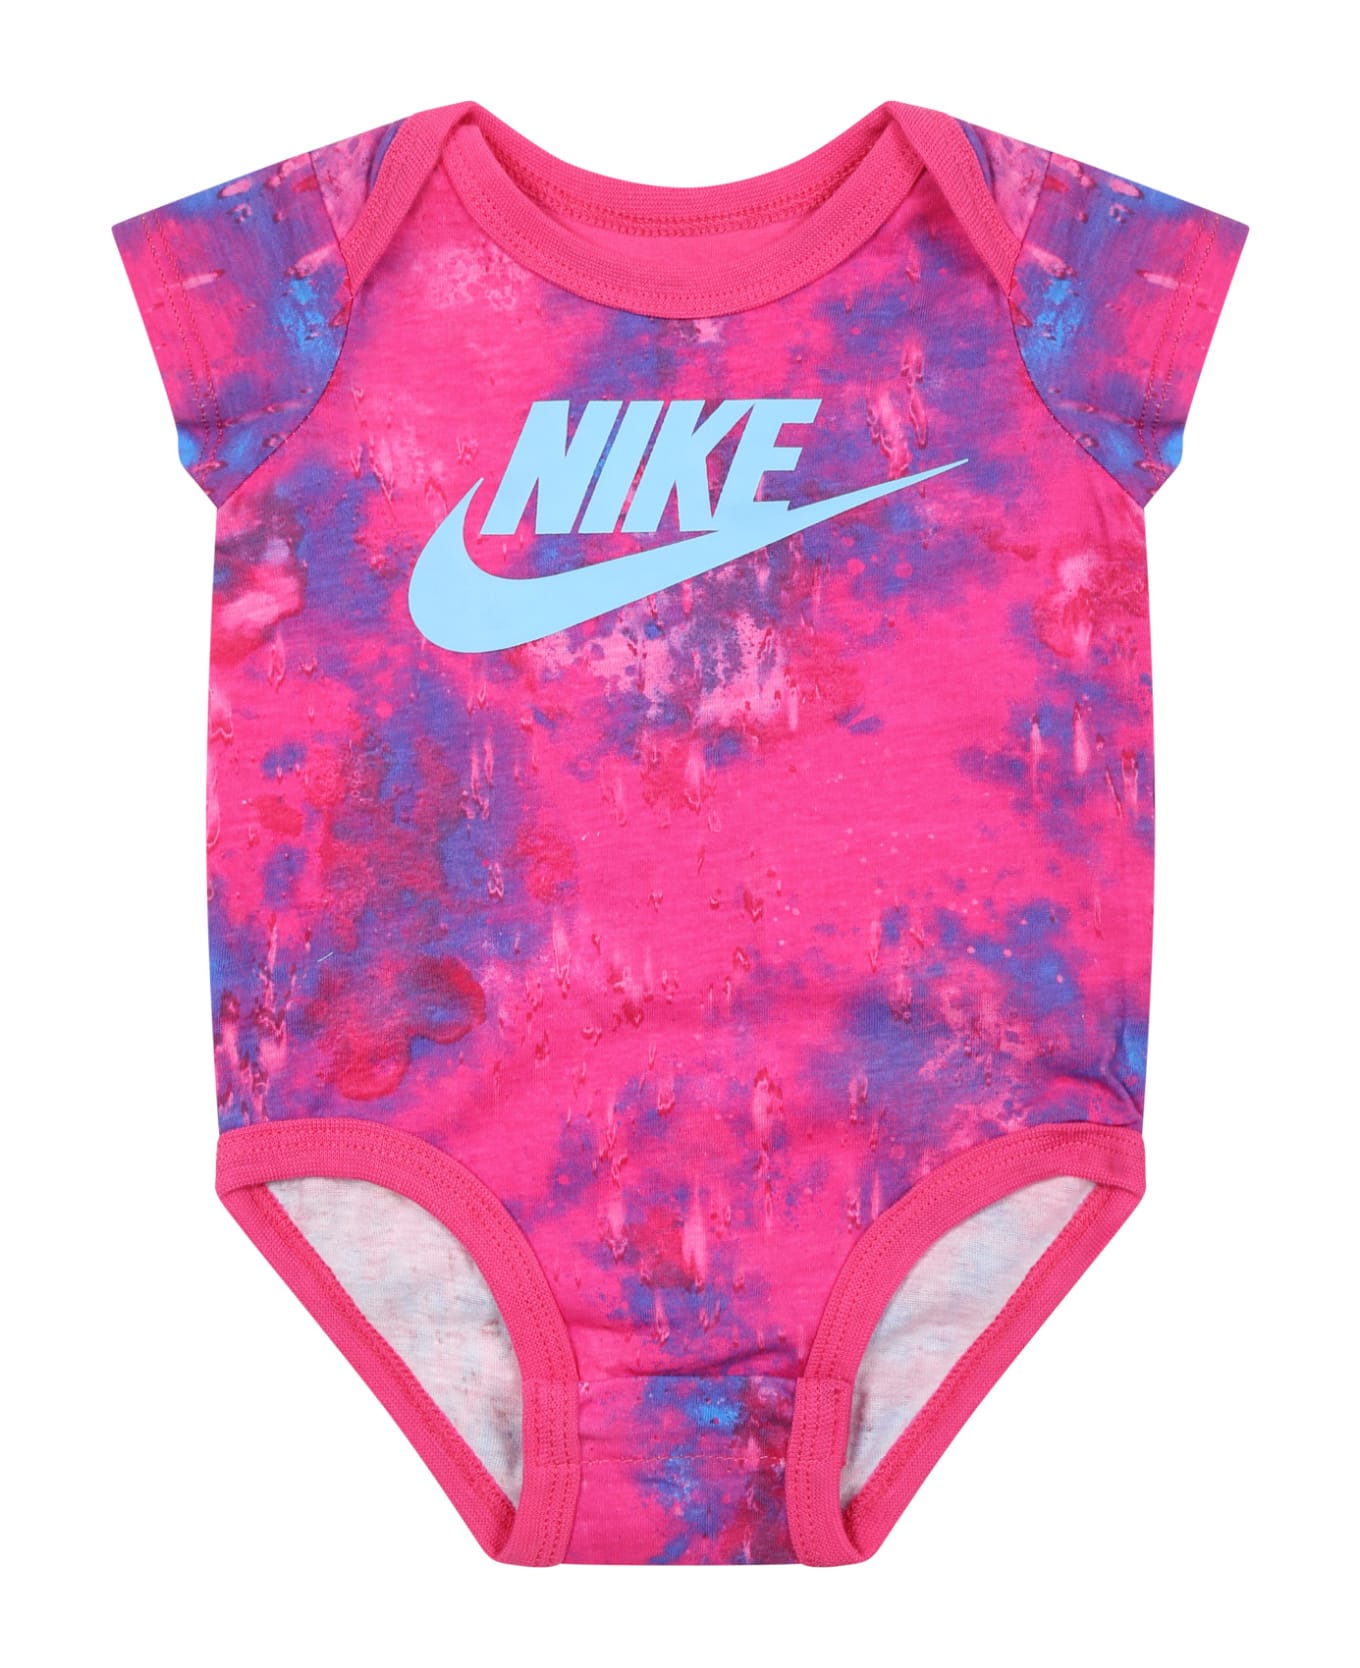 Nike Fuchsia Suit For Baby Girl With Swoosh - Multicolor